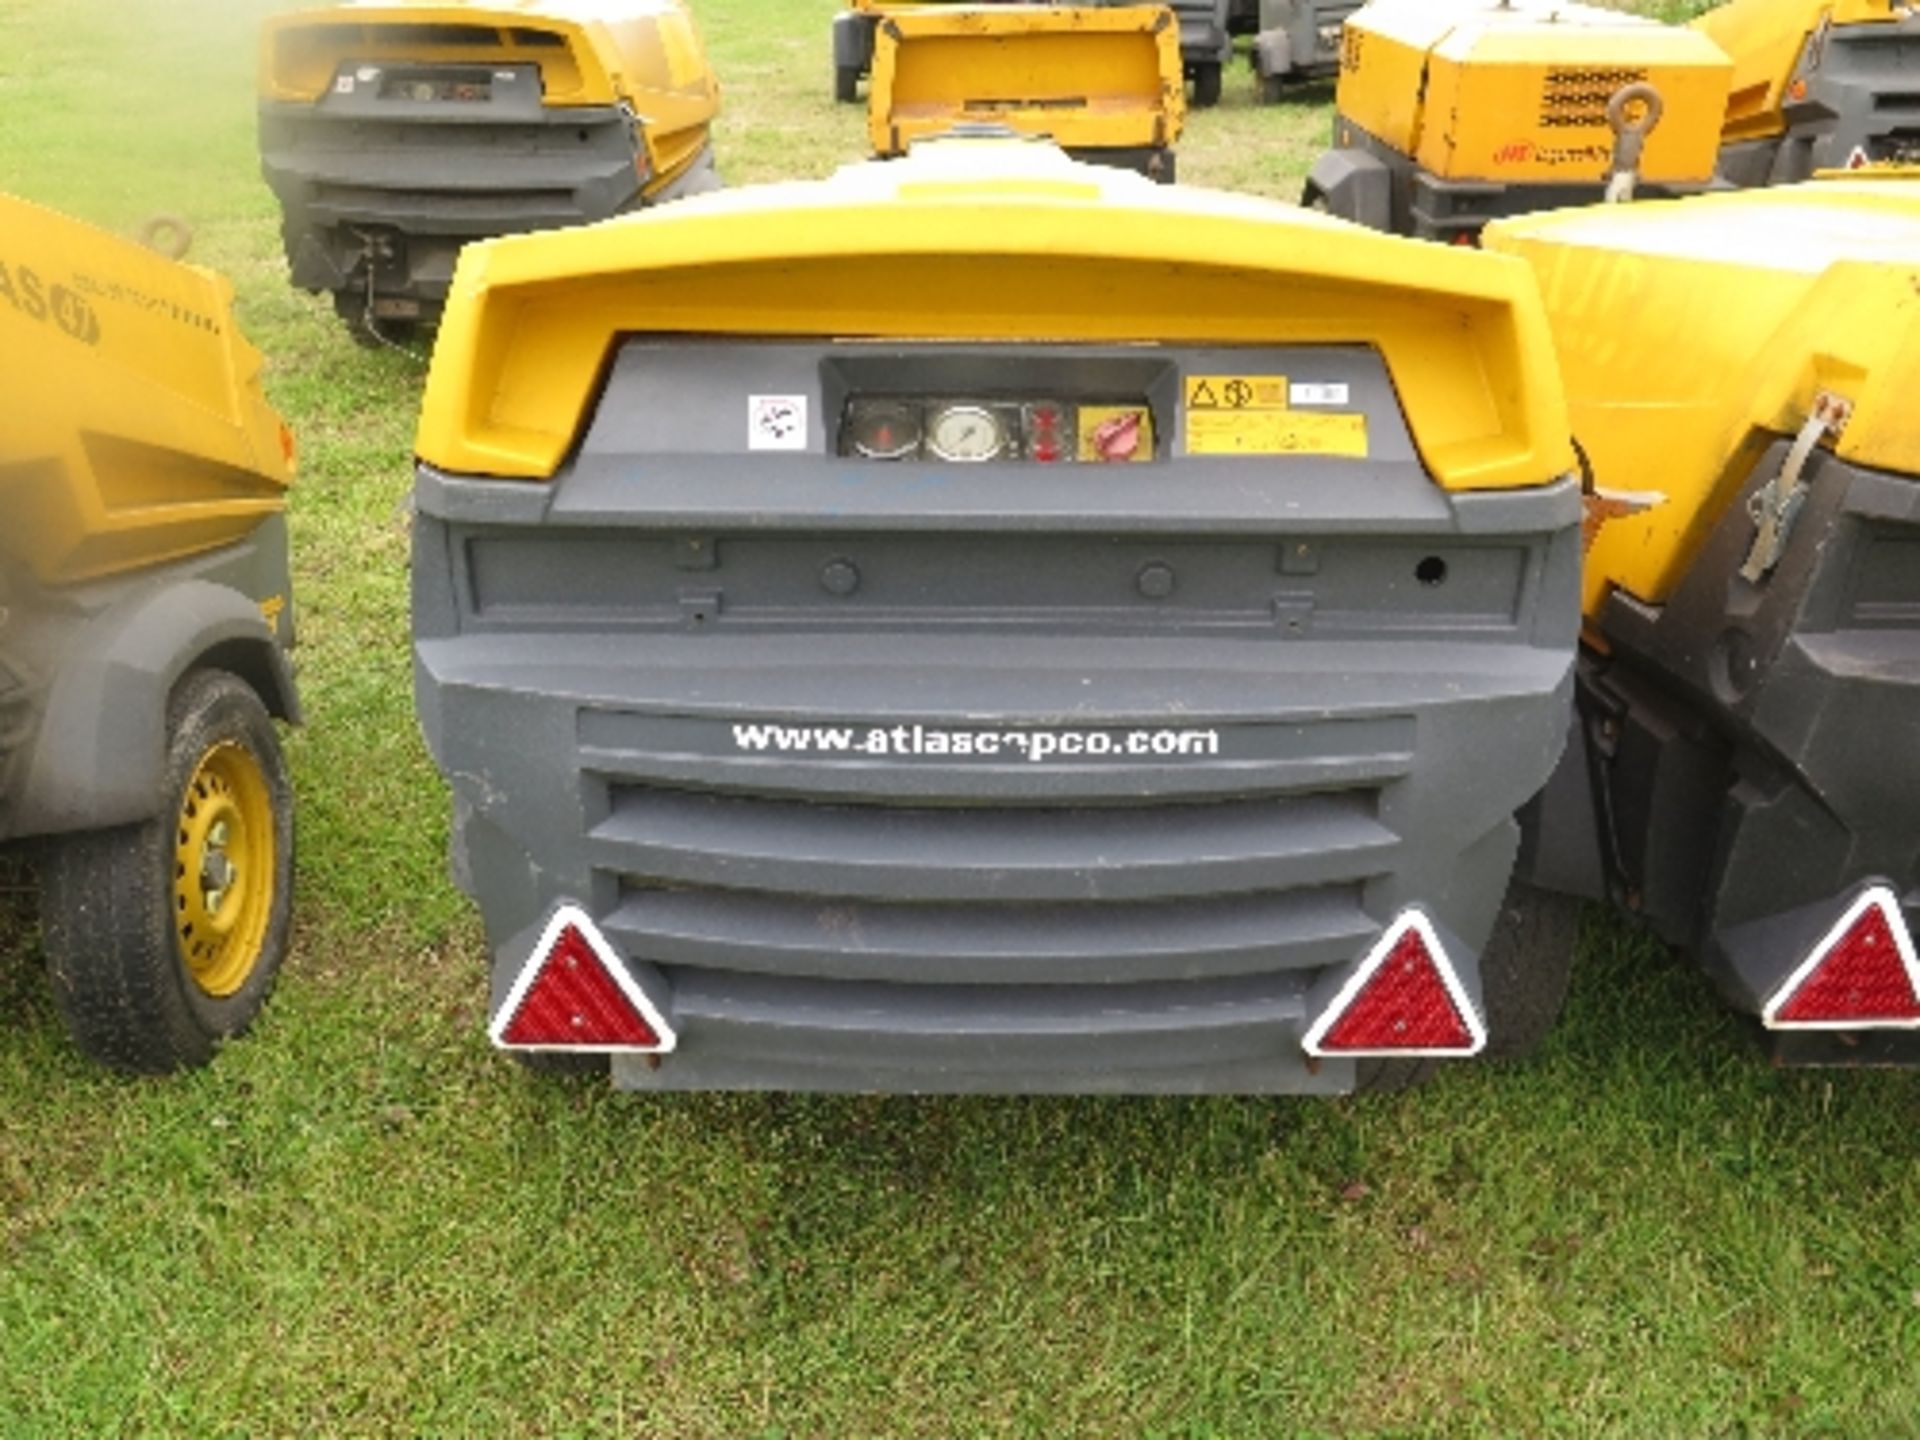 Atlas Copco XAS47 compressor 2008 5002443
618 HOURS - KUBOTA POWER - RUNS AND MAKES AIR
ALL LOTS - Image 2 of 5